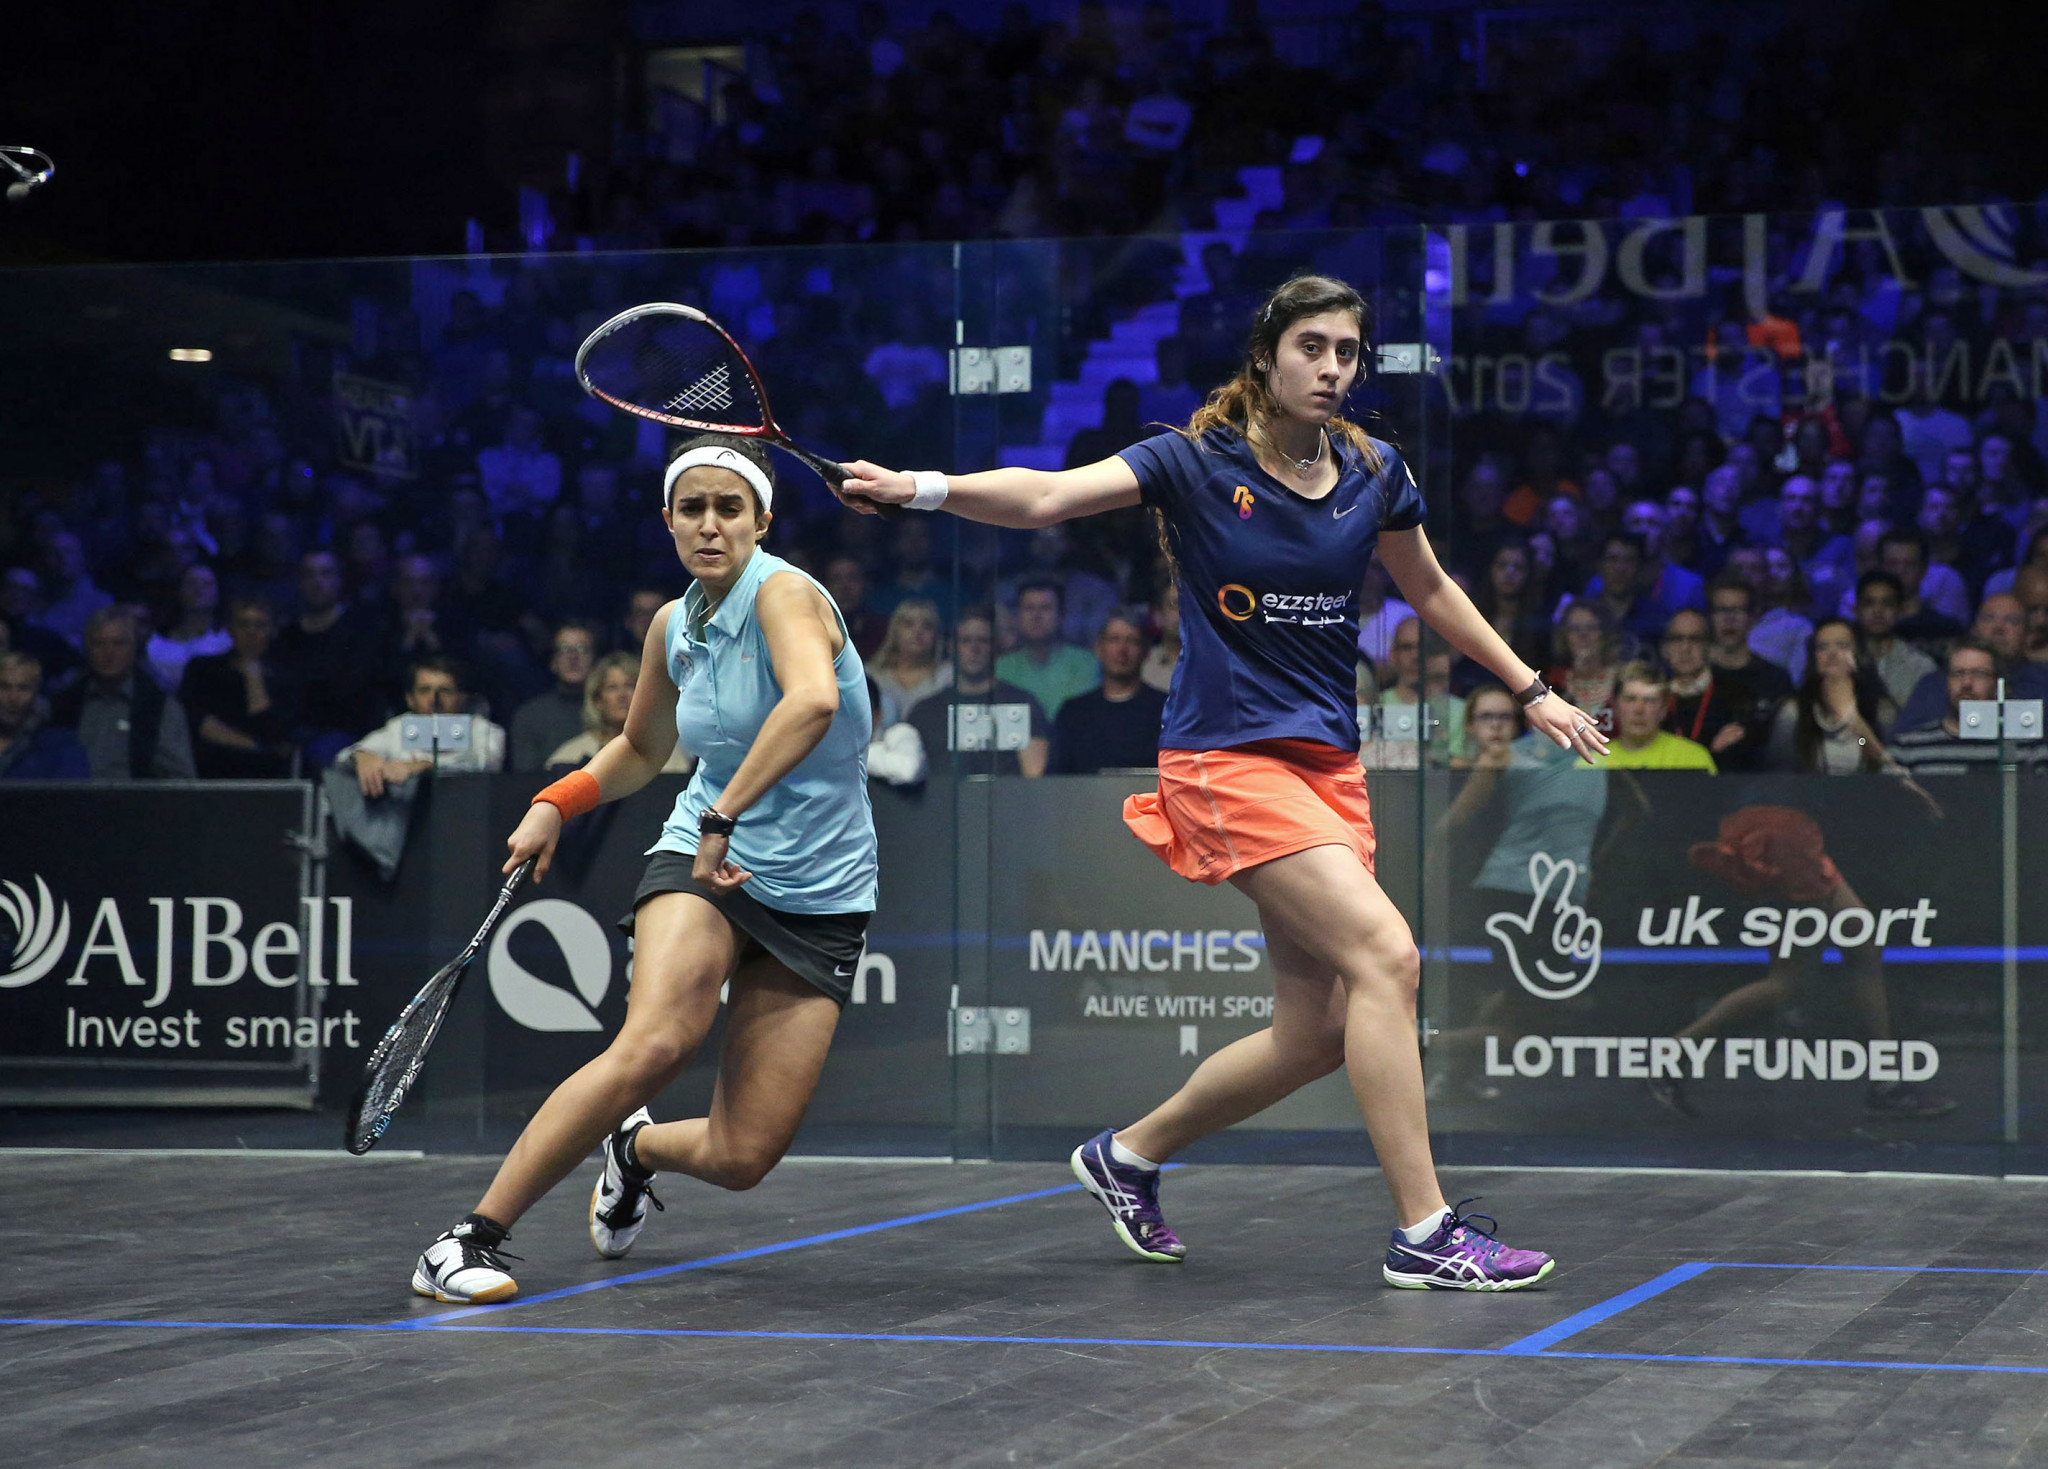 Egypt's Nour El Sherbini proved too strong for compatriot Nour El Tayeb in the women's semi-finals ©PSA